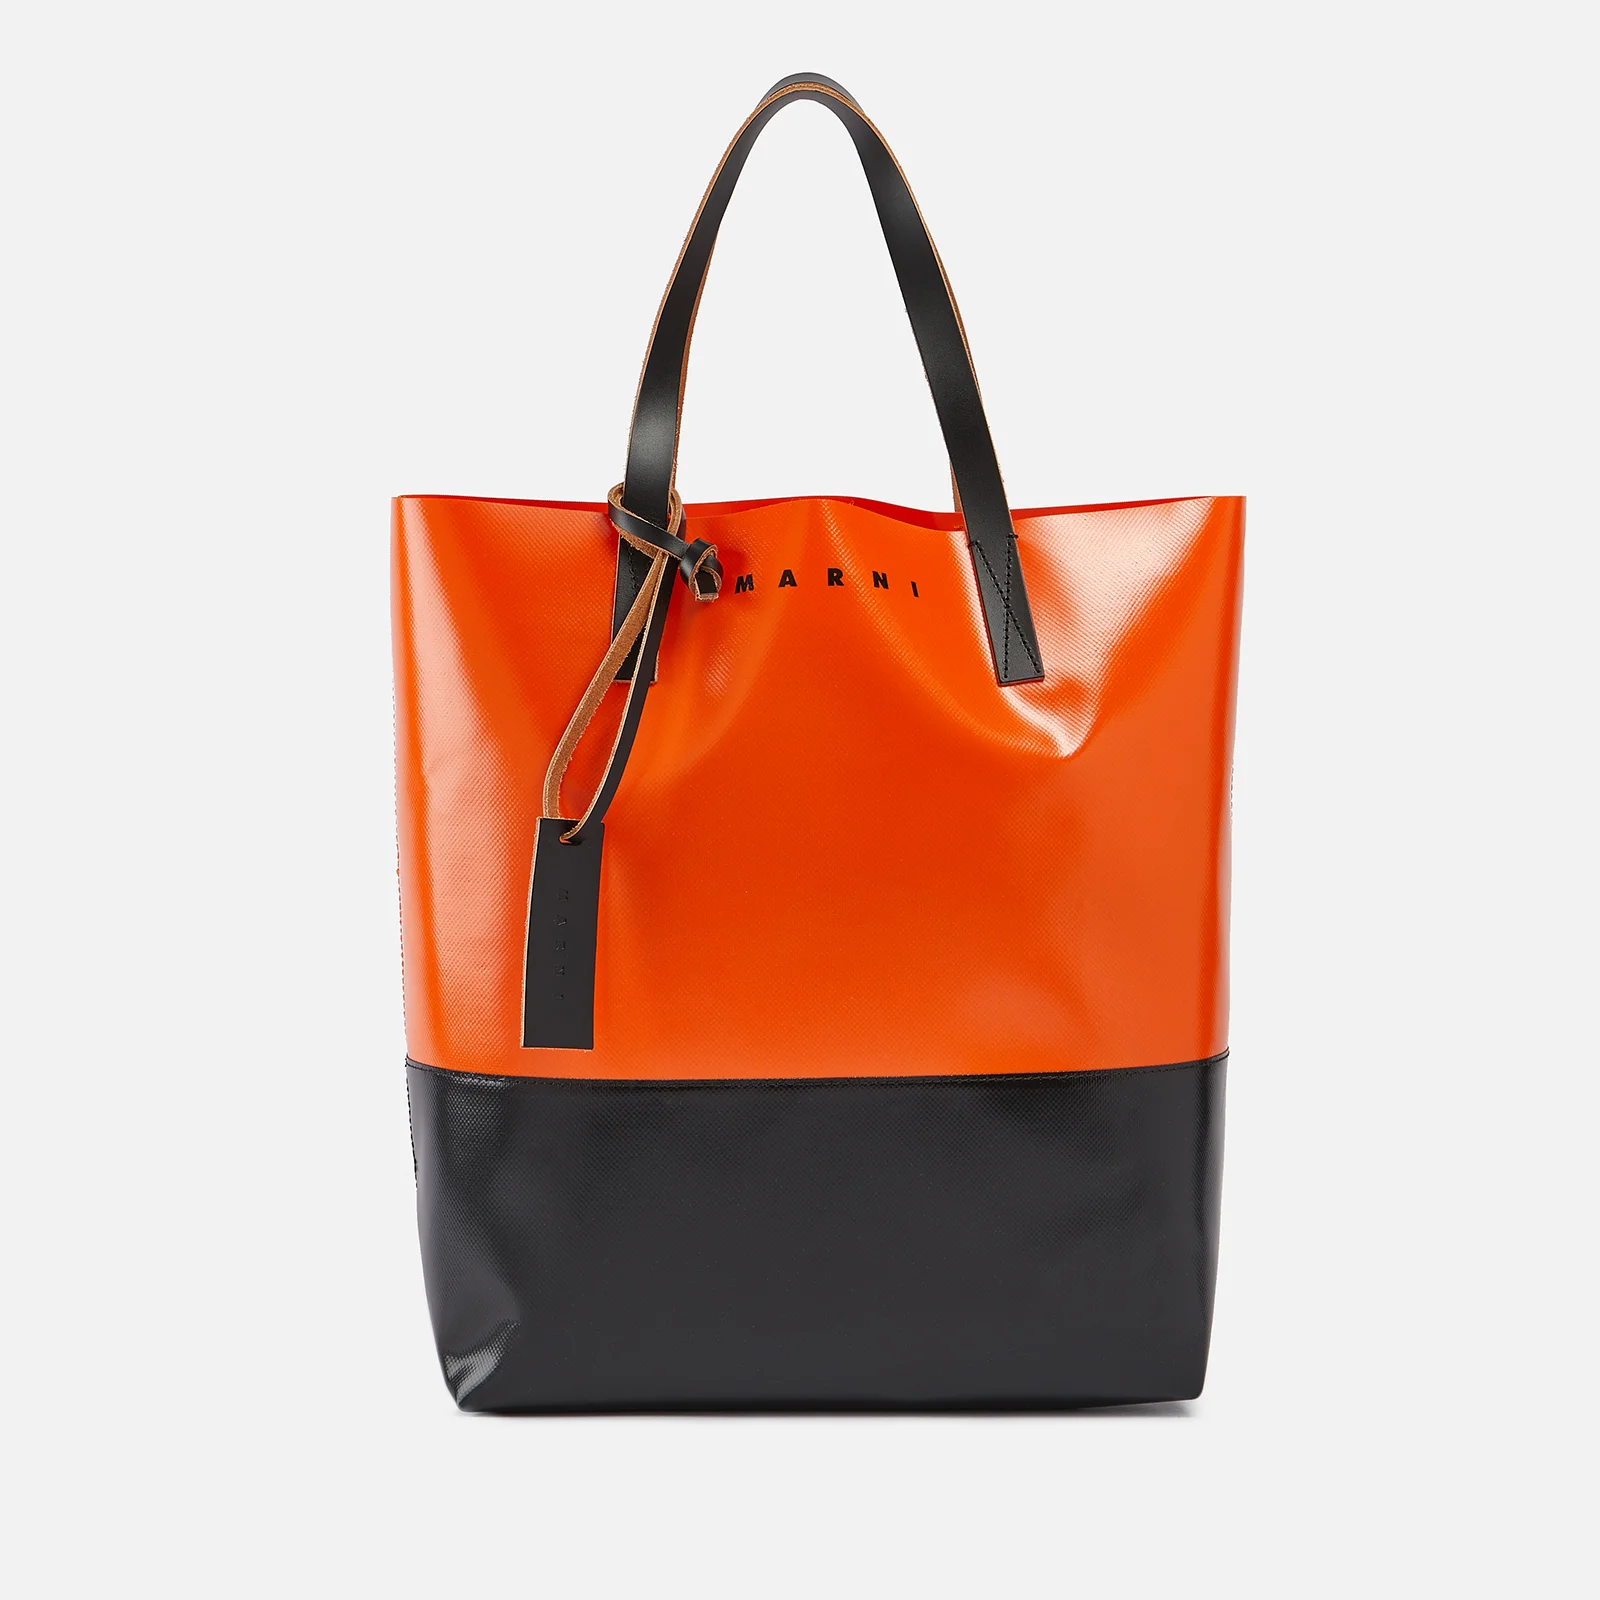 Marni Tribeca Leather-Trimmed Two-Tone Coated-PVC Tote Image 1